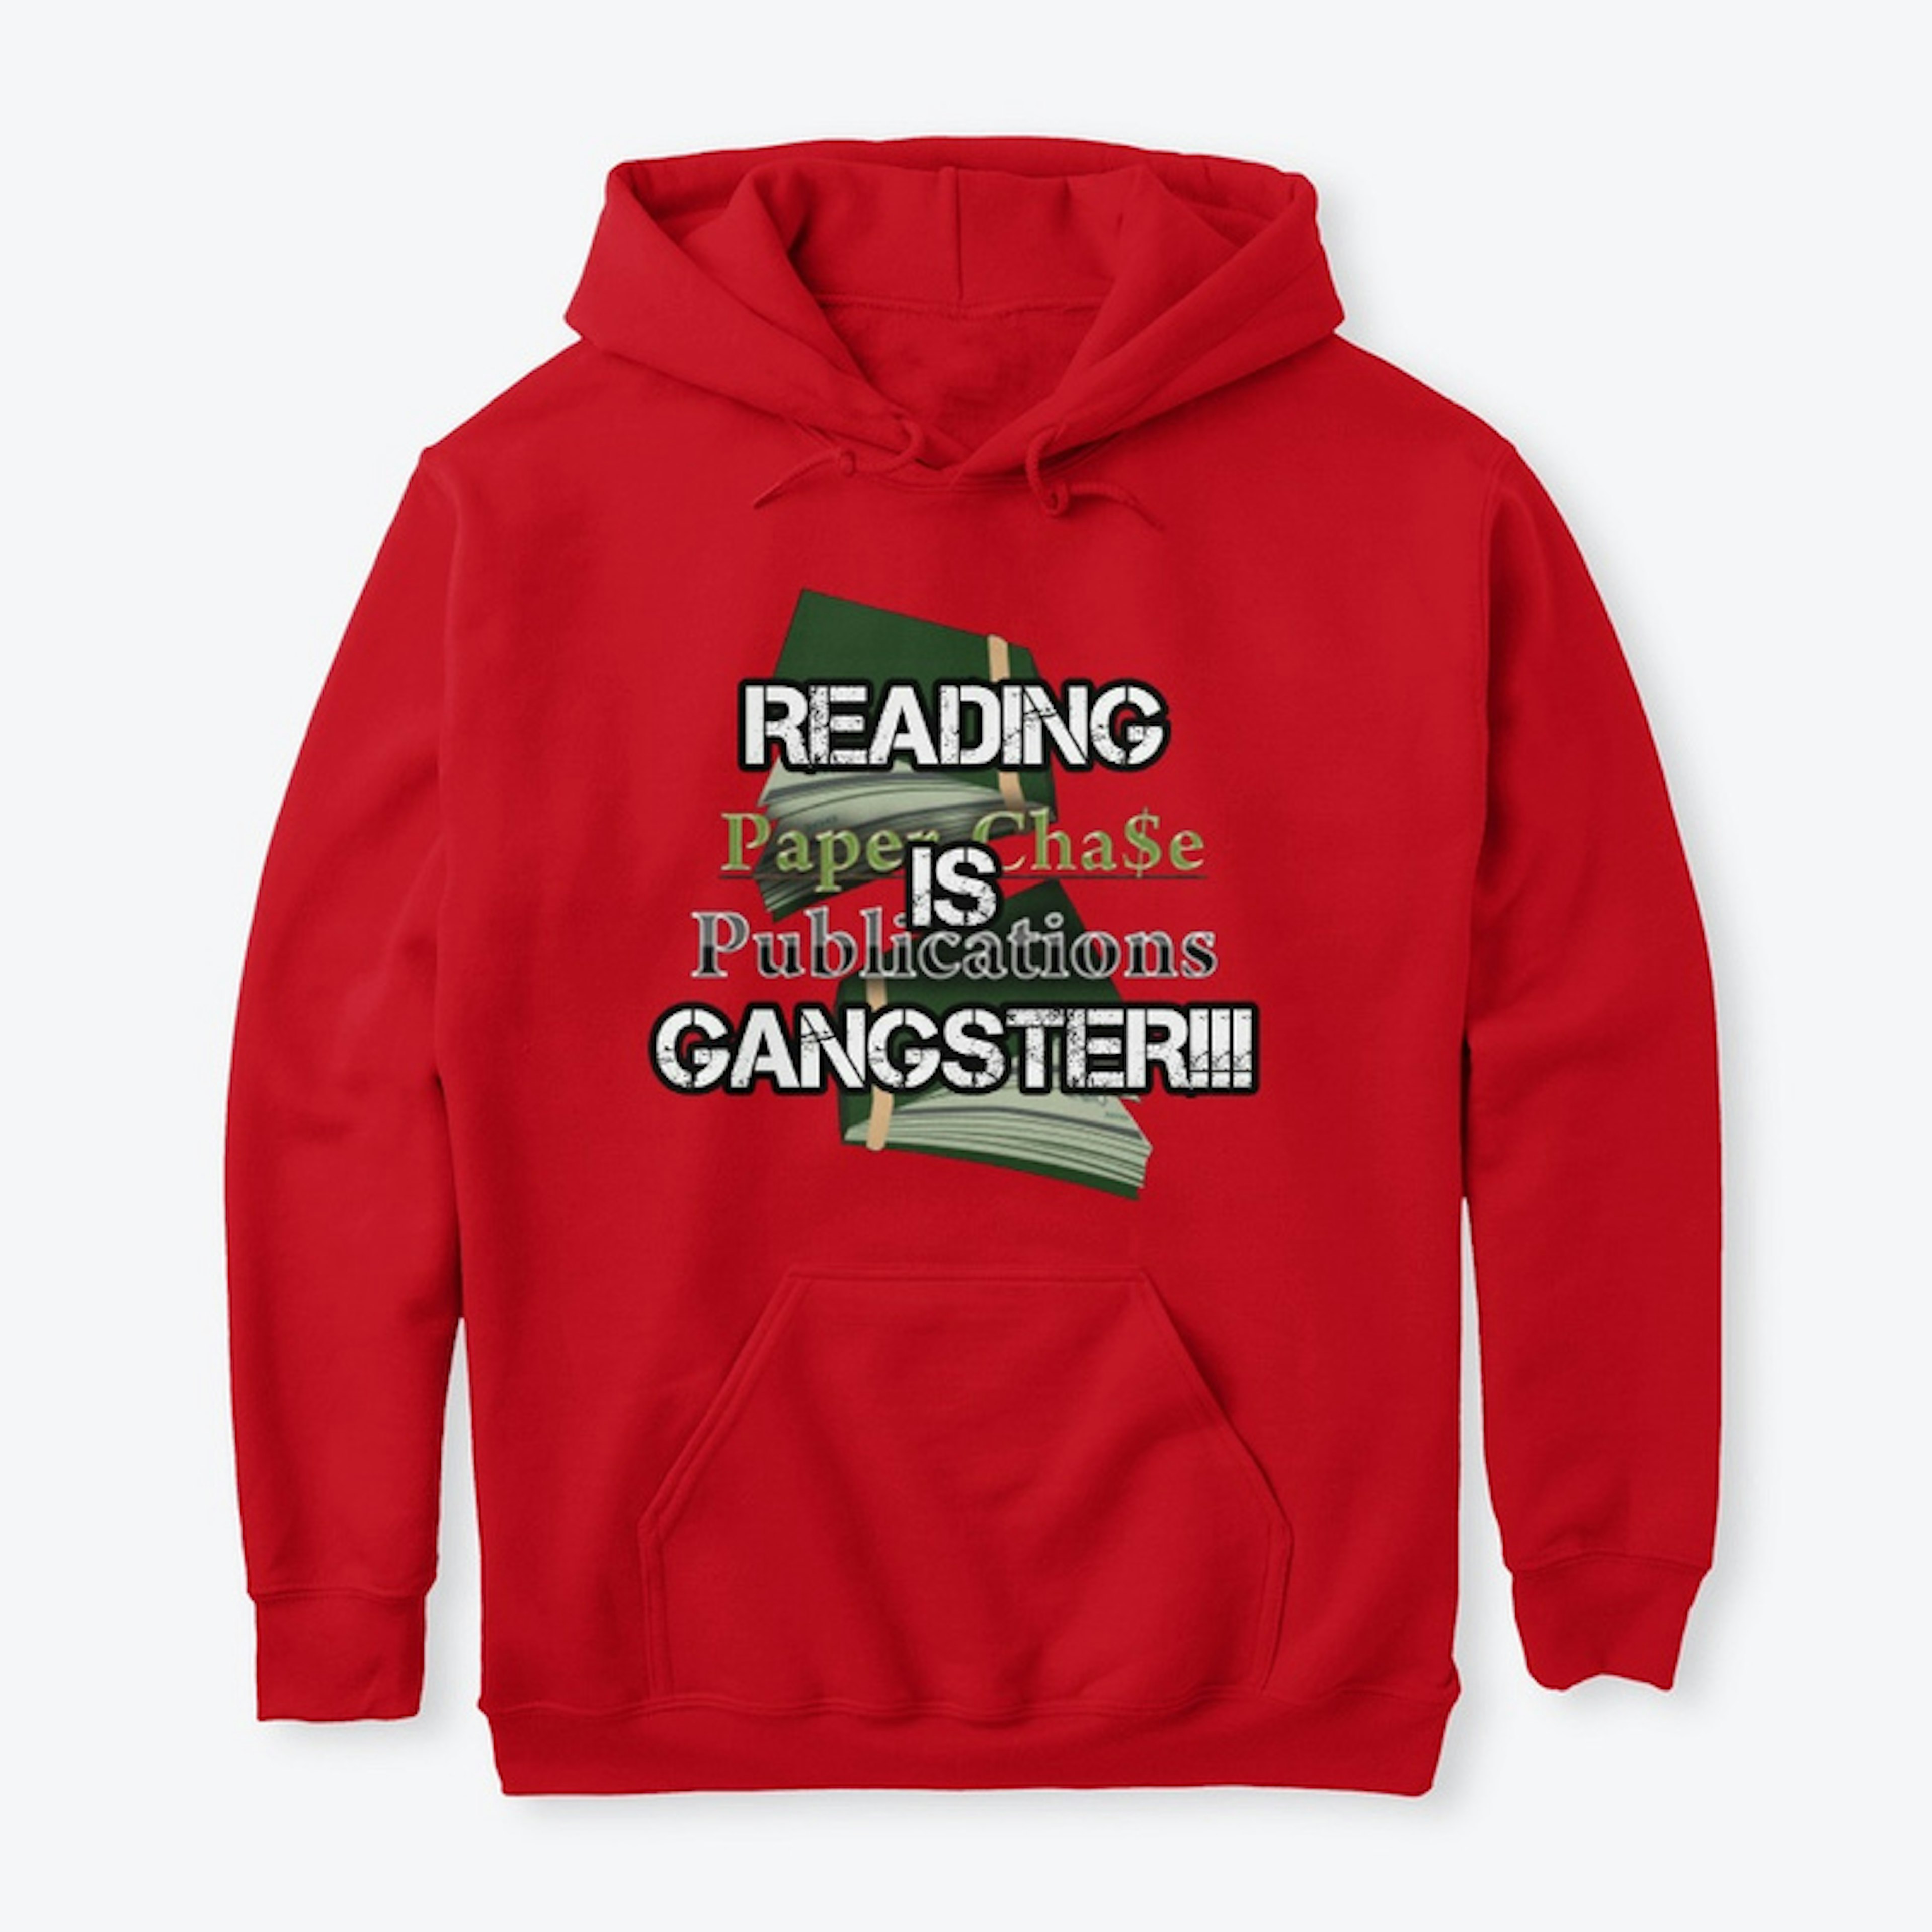 "Reading is Gangster" Official